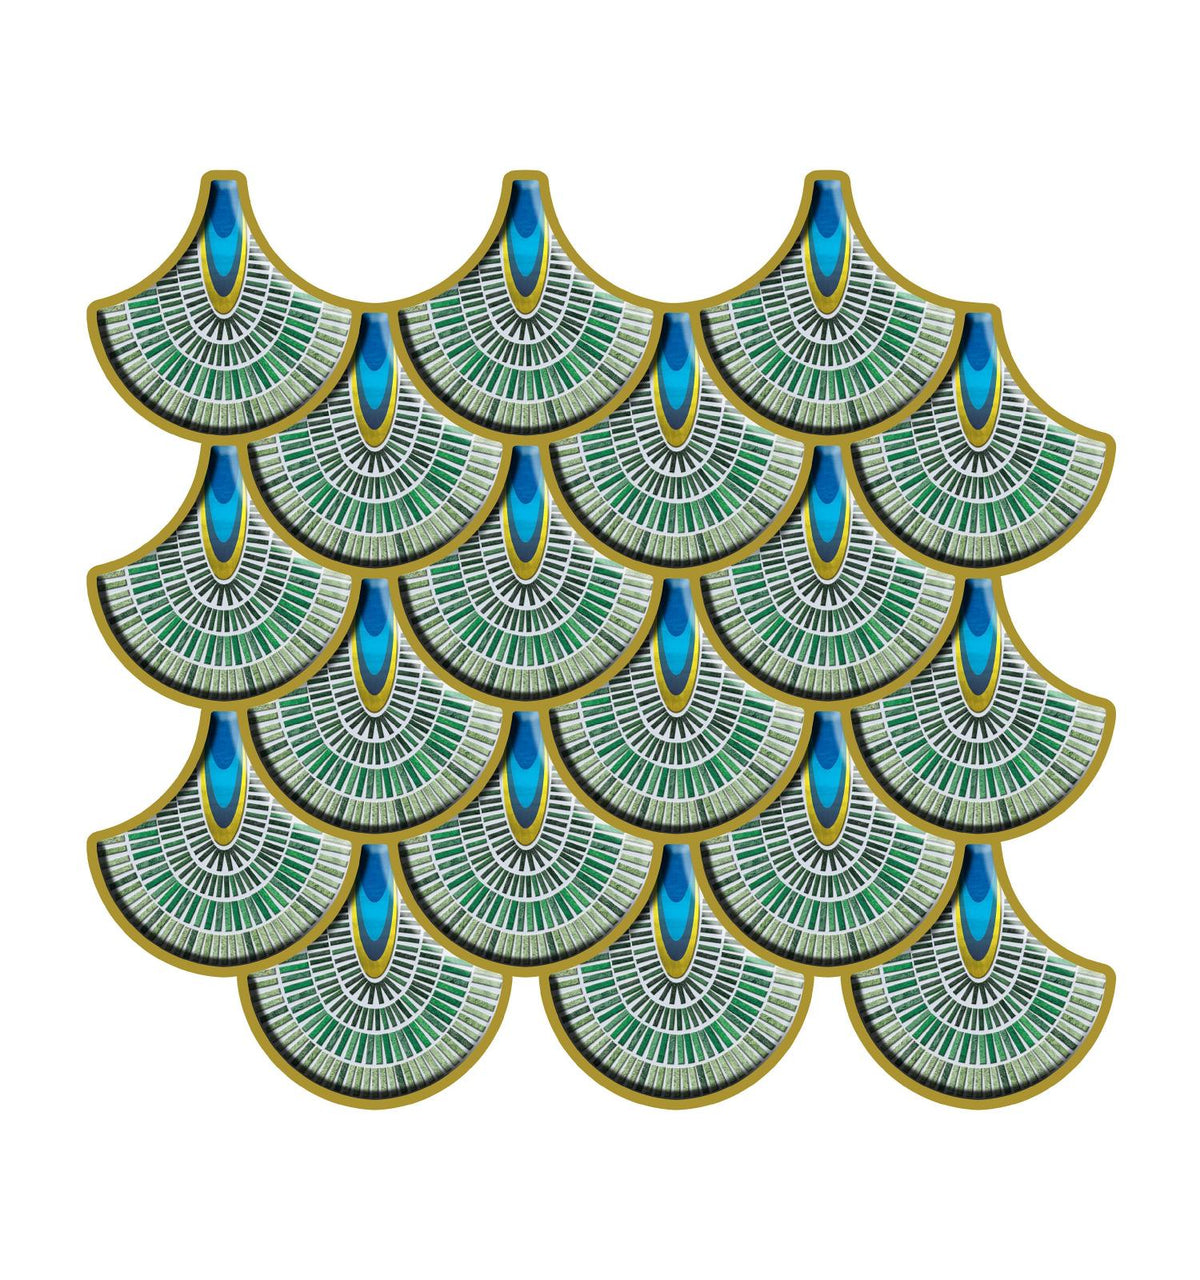 Peacock Peel And Stick Wall Tile | Green Kitchen Backsplash Tiles | Self Adhesive Tiles For Home Décor